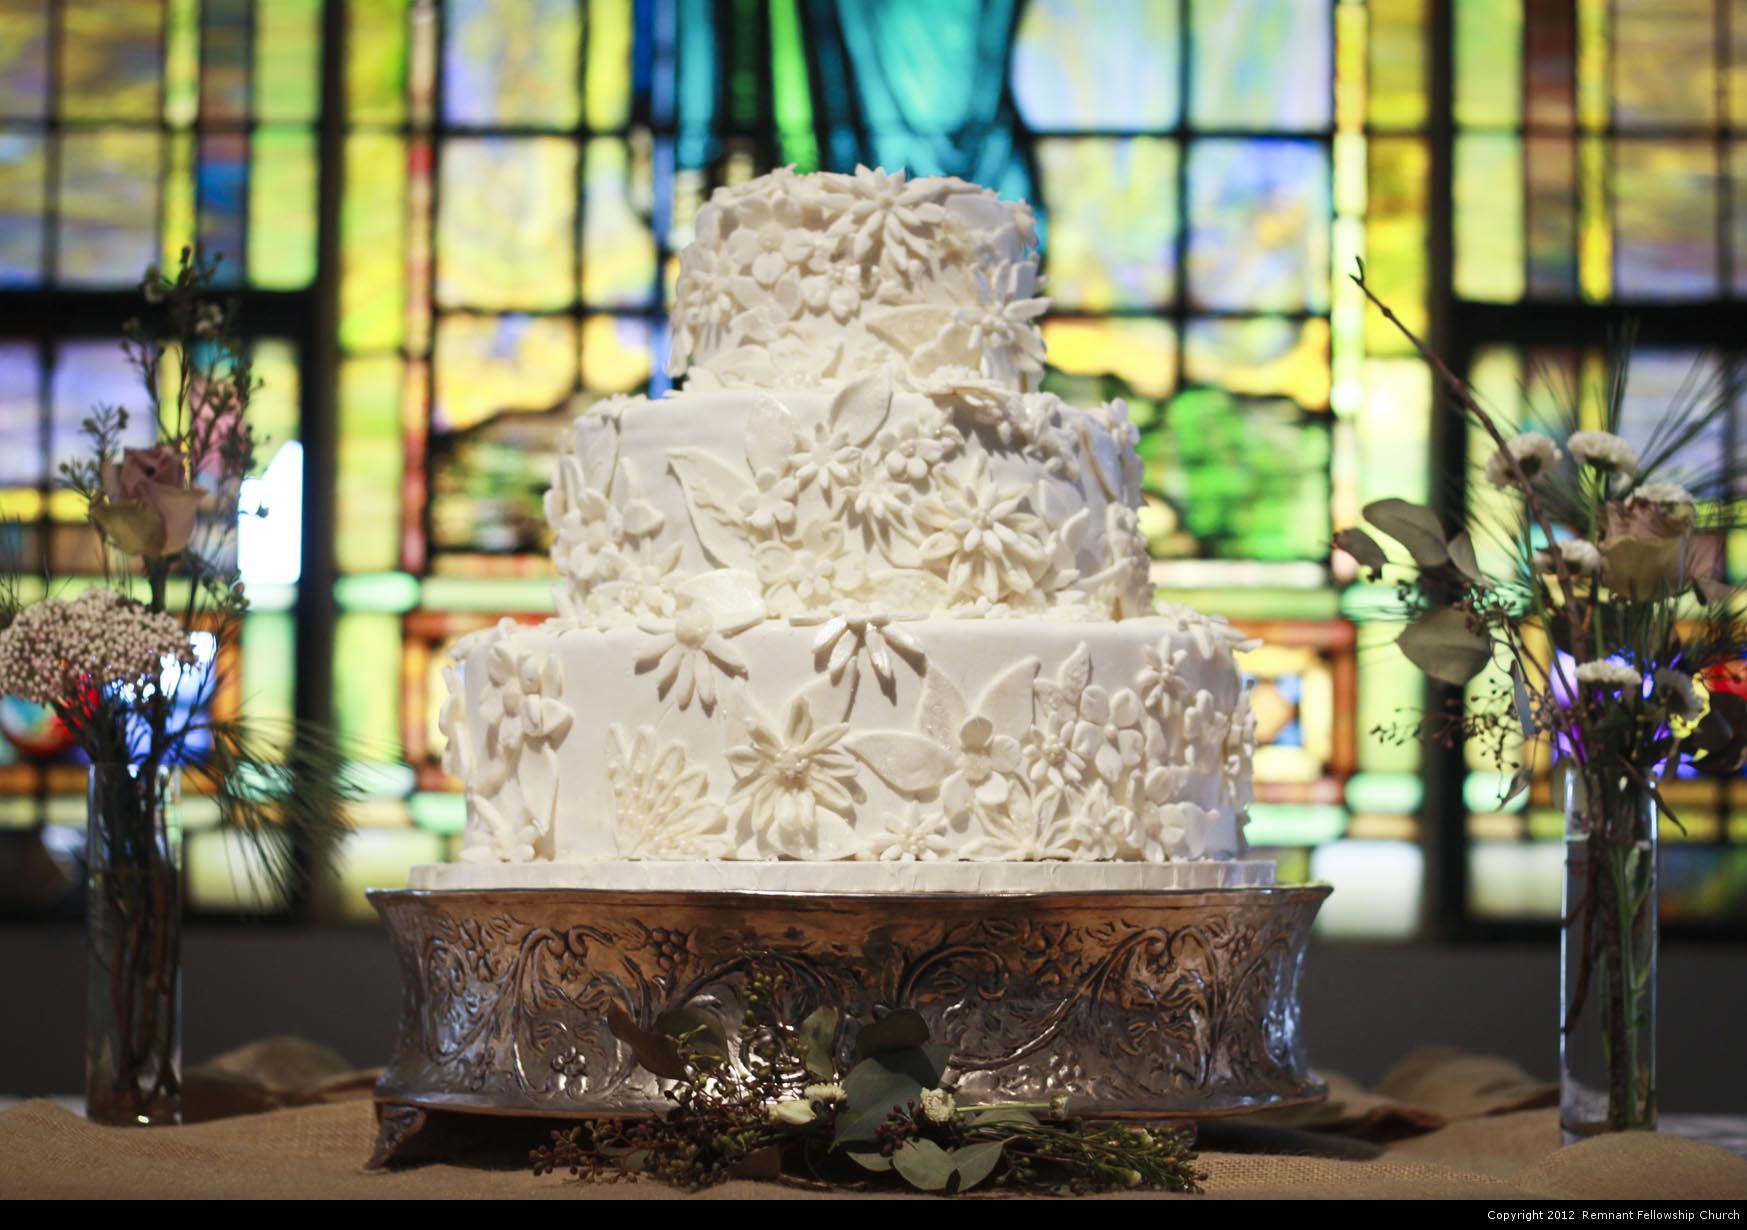 Winter Wedding Cake inspiration | Three-Tiered Cake with Floral Fondant Decorations